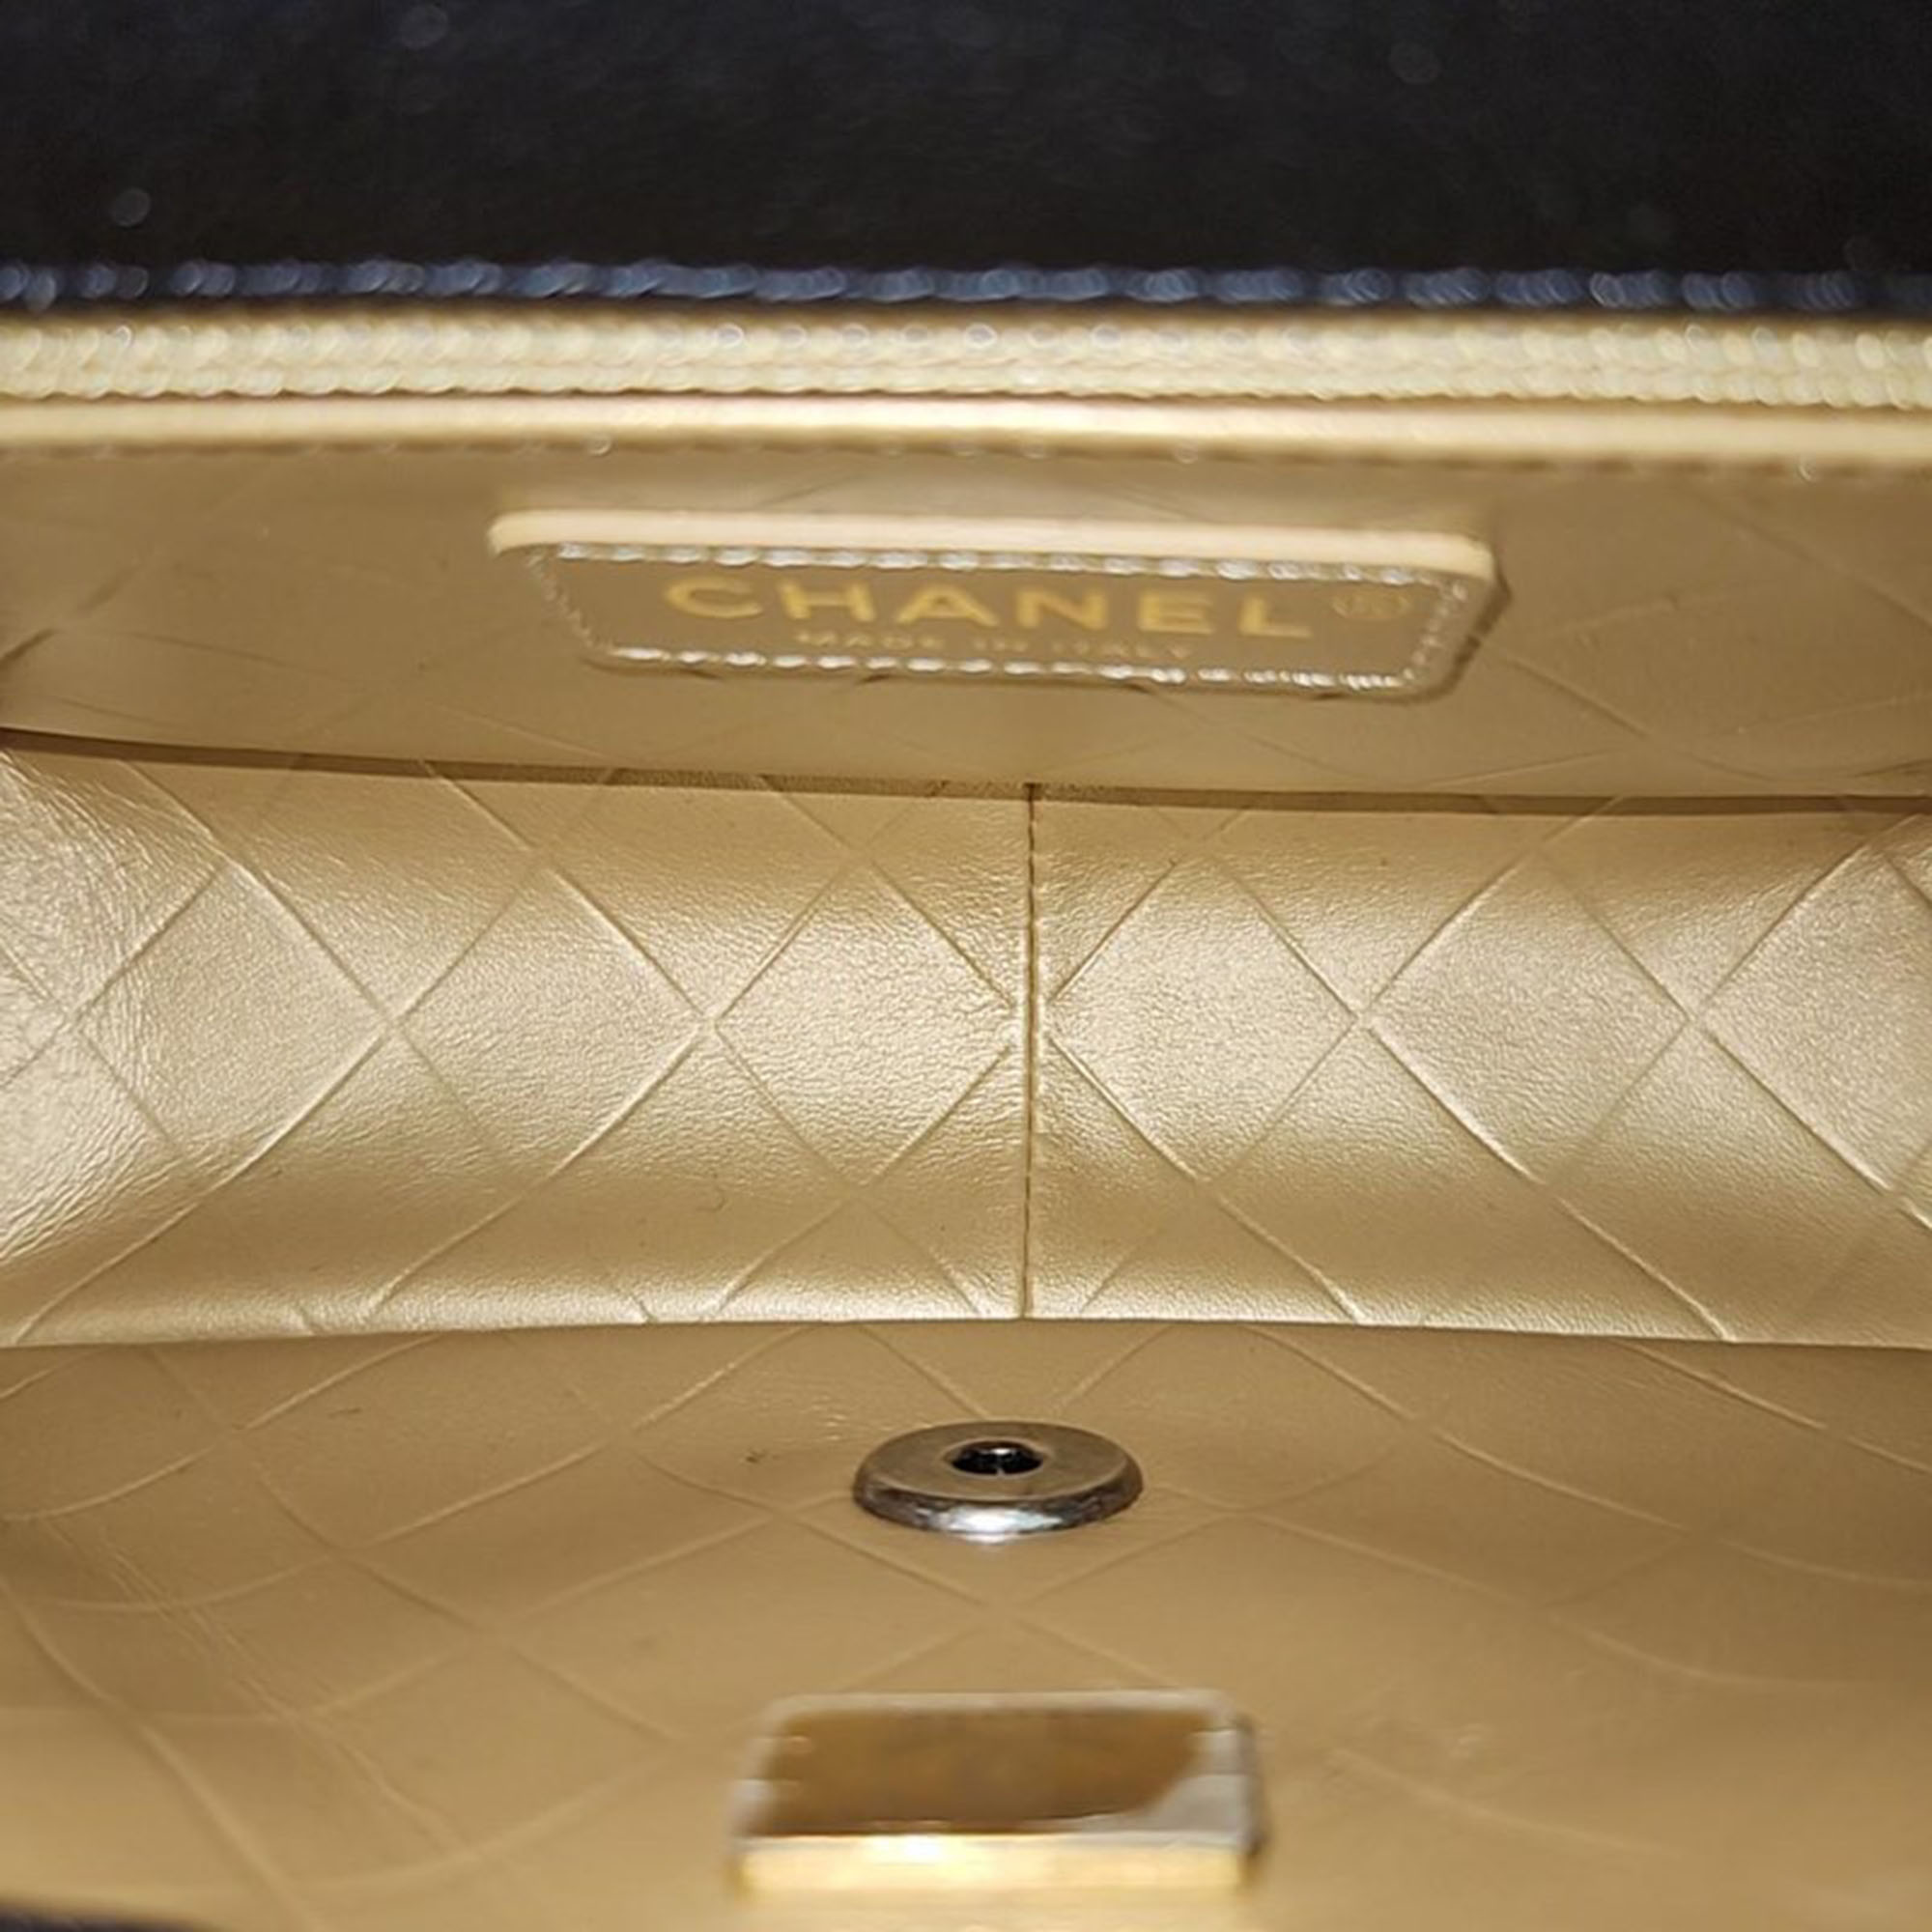 Chanel Classic Trimmed Shoulder Bag Small